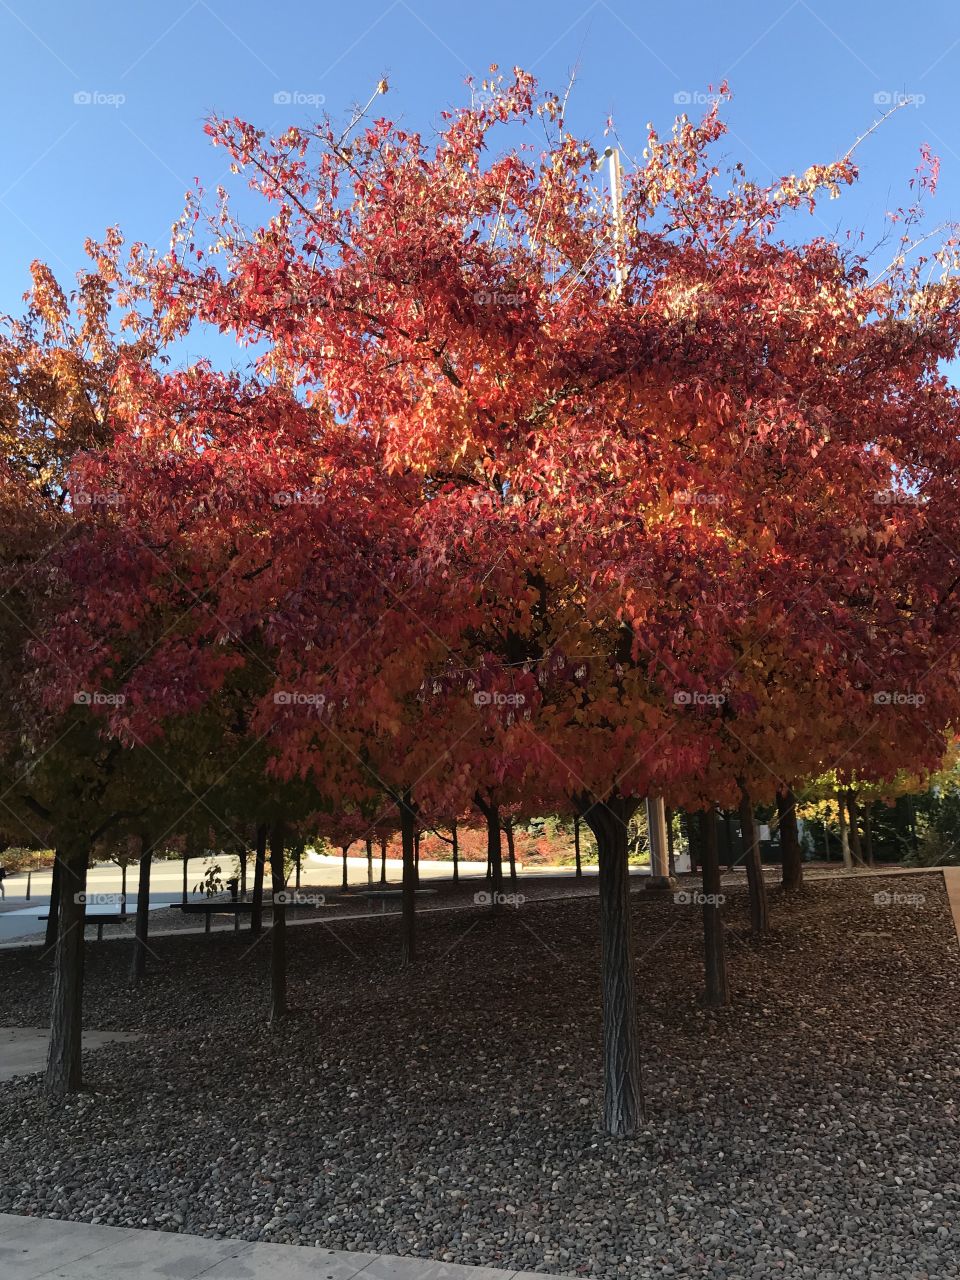 Darker autumnal photograph of a university campus through a small section of brightly colored trees